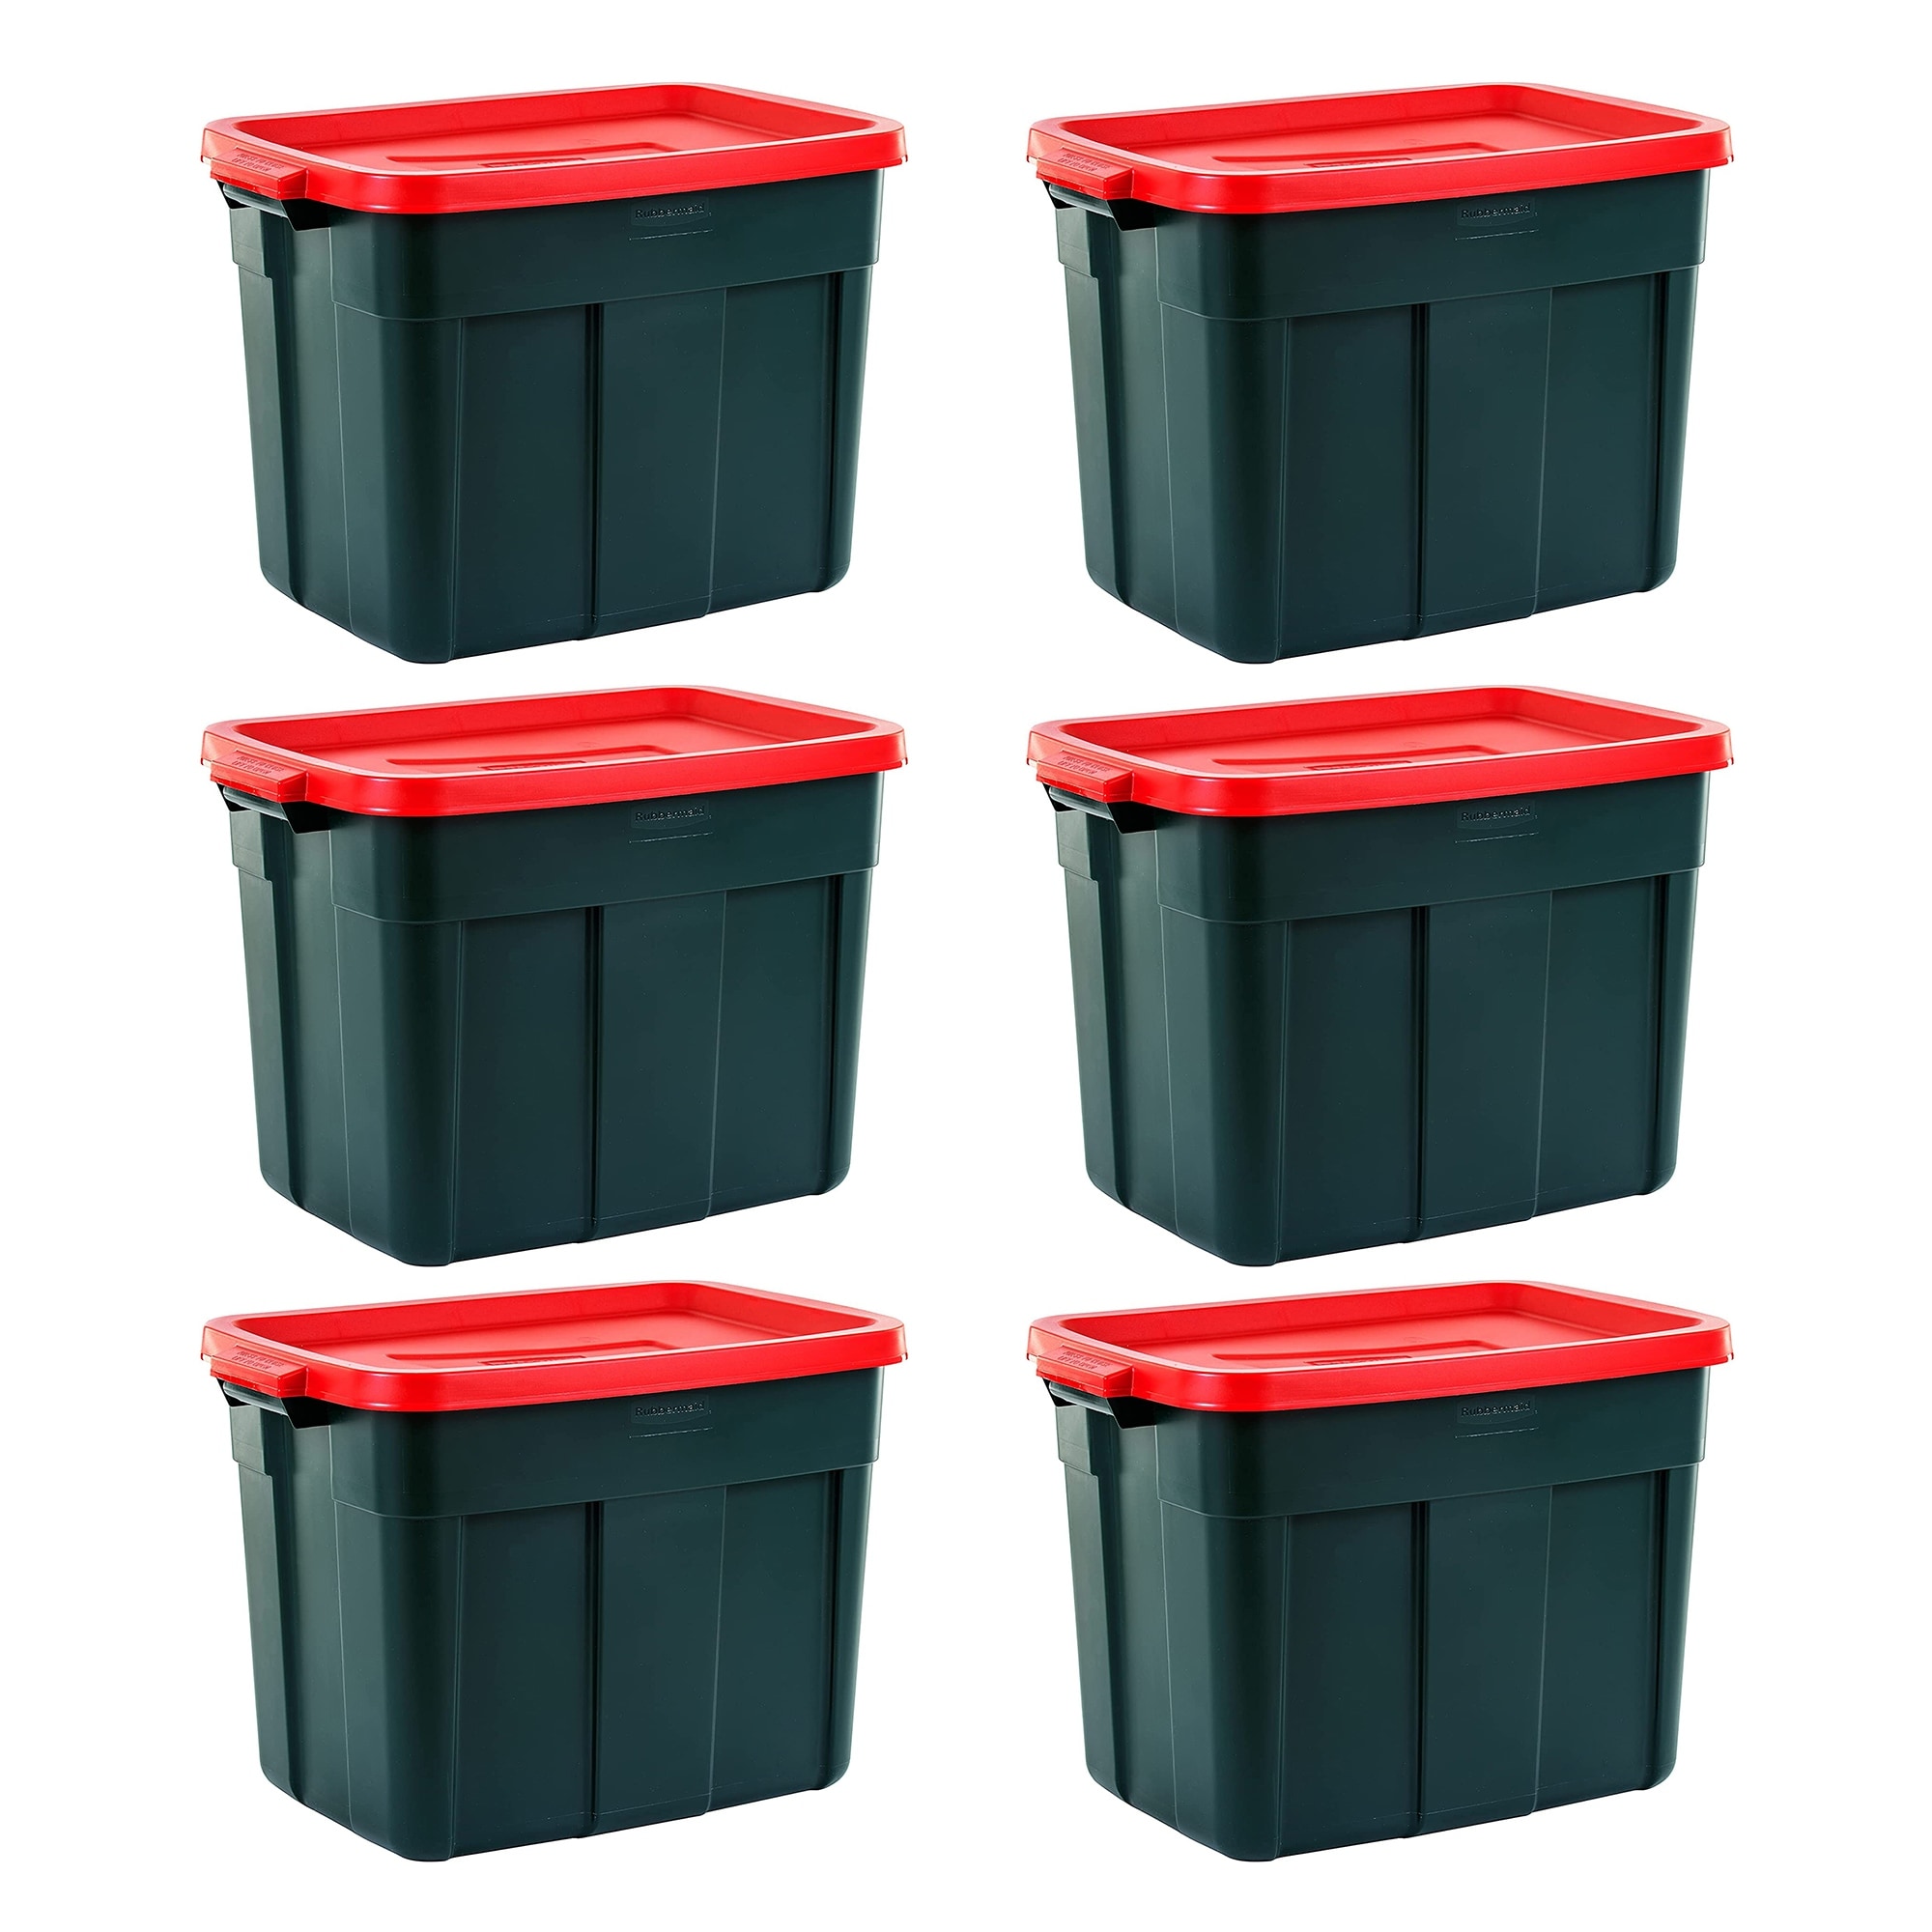 https://ak1.ostkcdn.com/images/products/is/images/direct/f82ebd49727296b6727ffb12f70589161c468a39/Rubbermaid-Roughneck-18-Gal-Plastic-Holiday-Storage-Tote%2C-Green-and-Red-%286-Pack%29.jpg